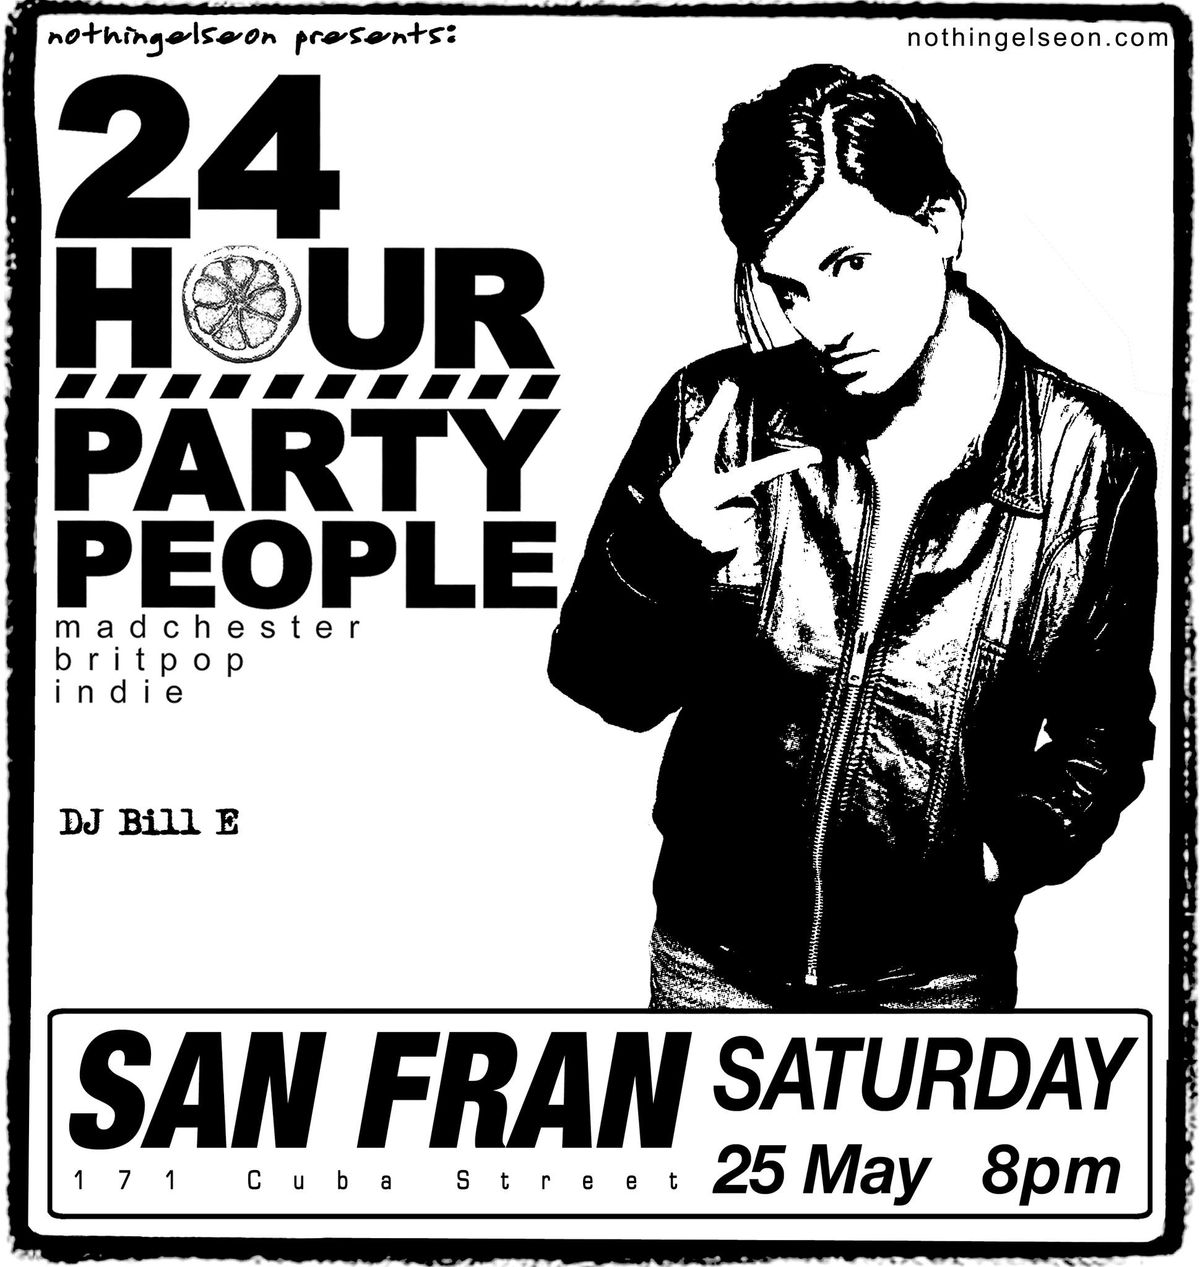 24 Hour Party People, 25 May